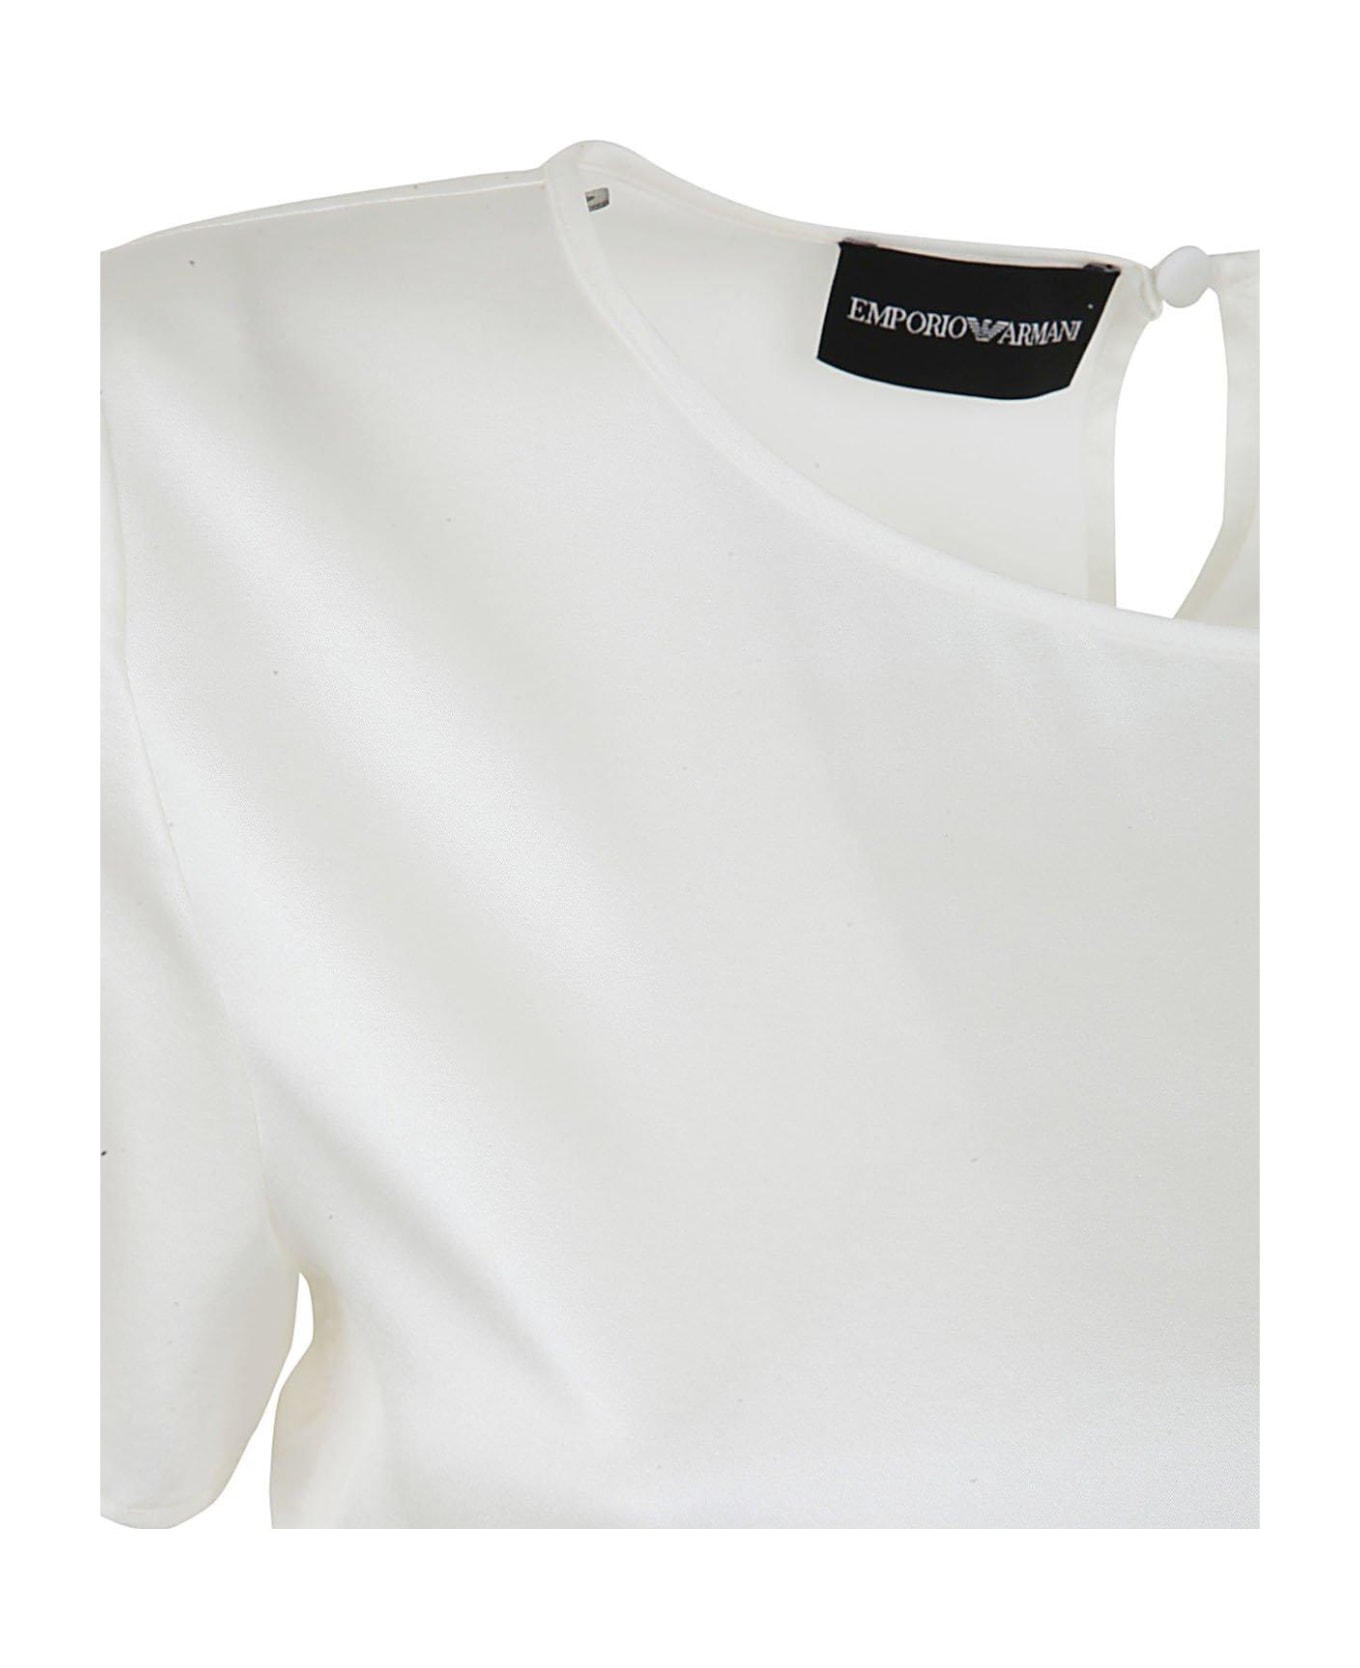 Emporio Armani Crewenck Short-sleeved T-shirt - White Tシャツ